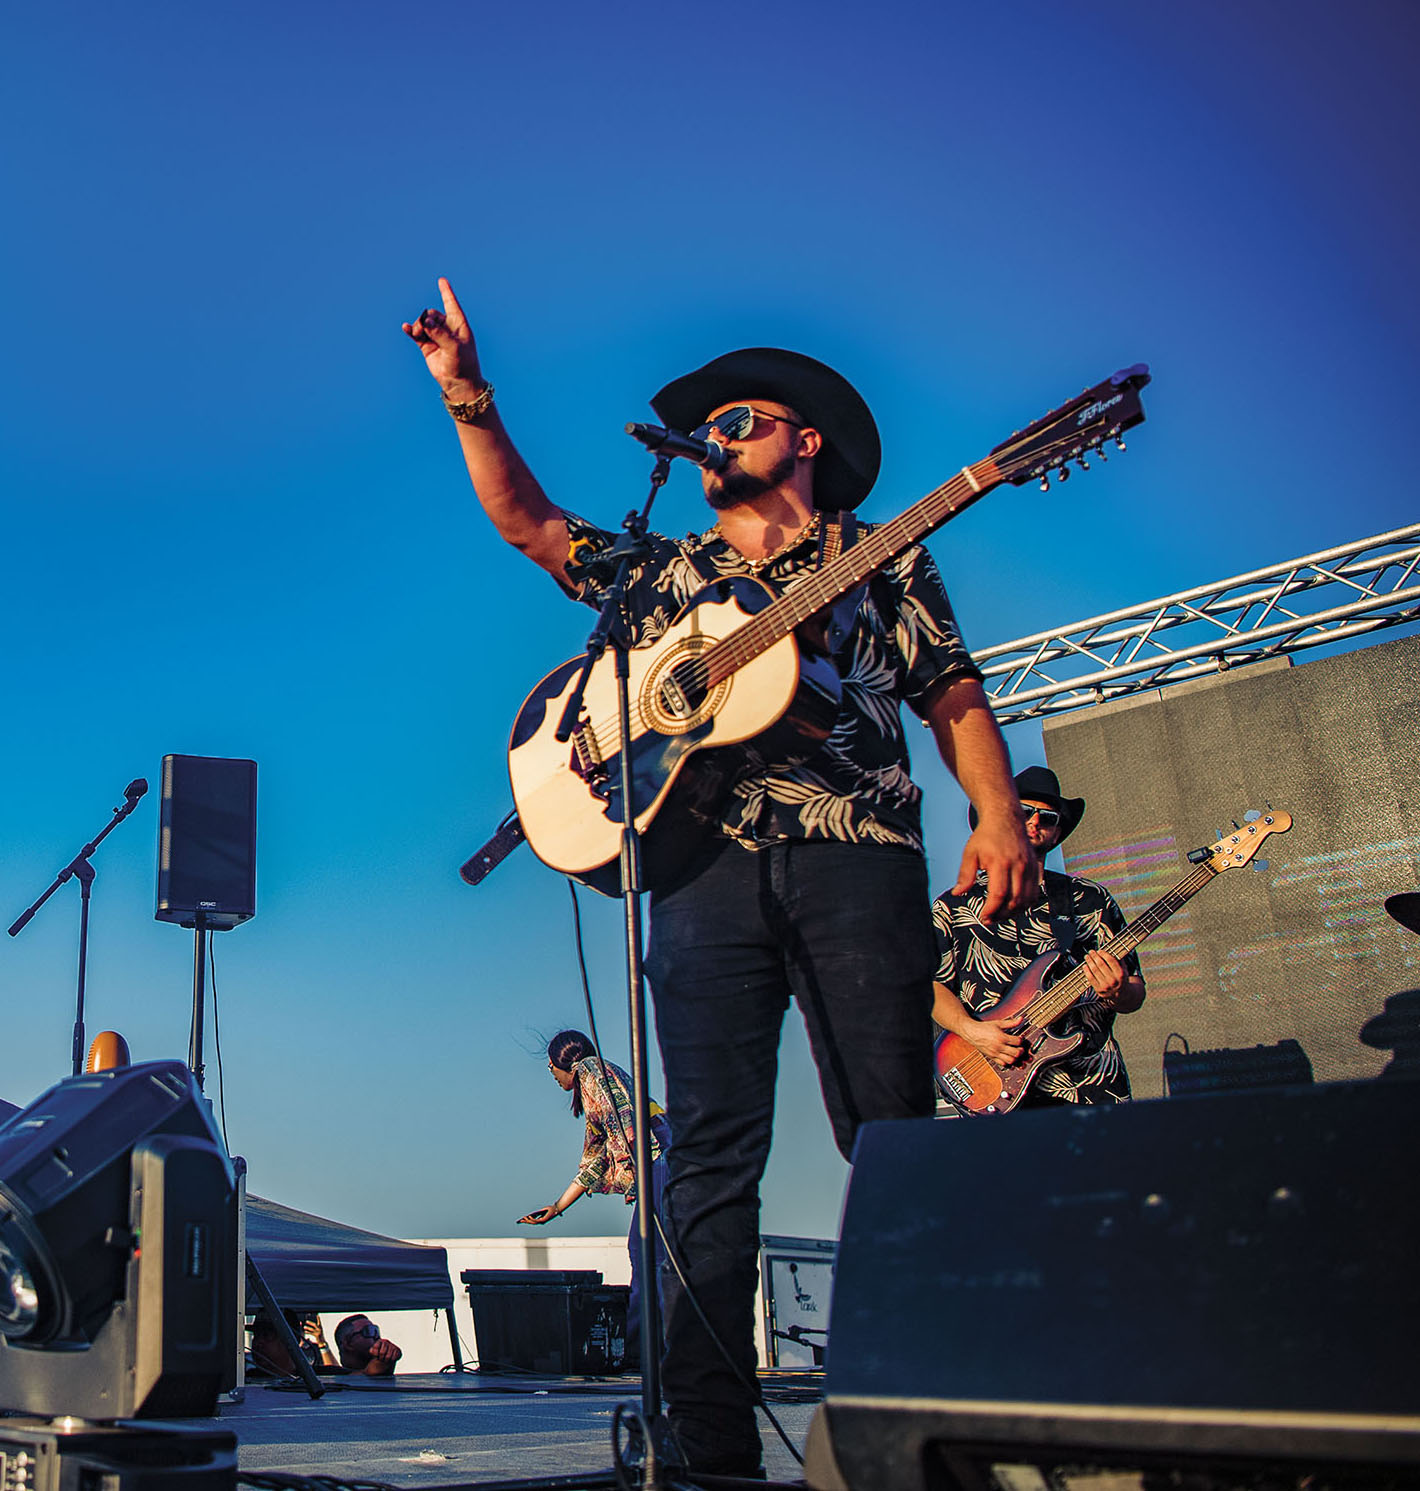 A man in a cowboy hat holds his arm up in front of a crowd with a guitar